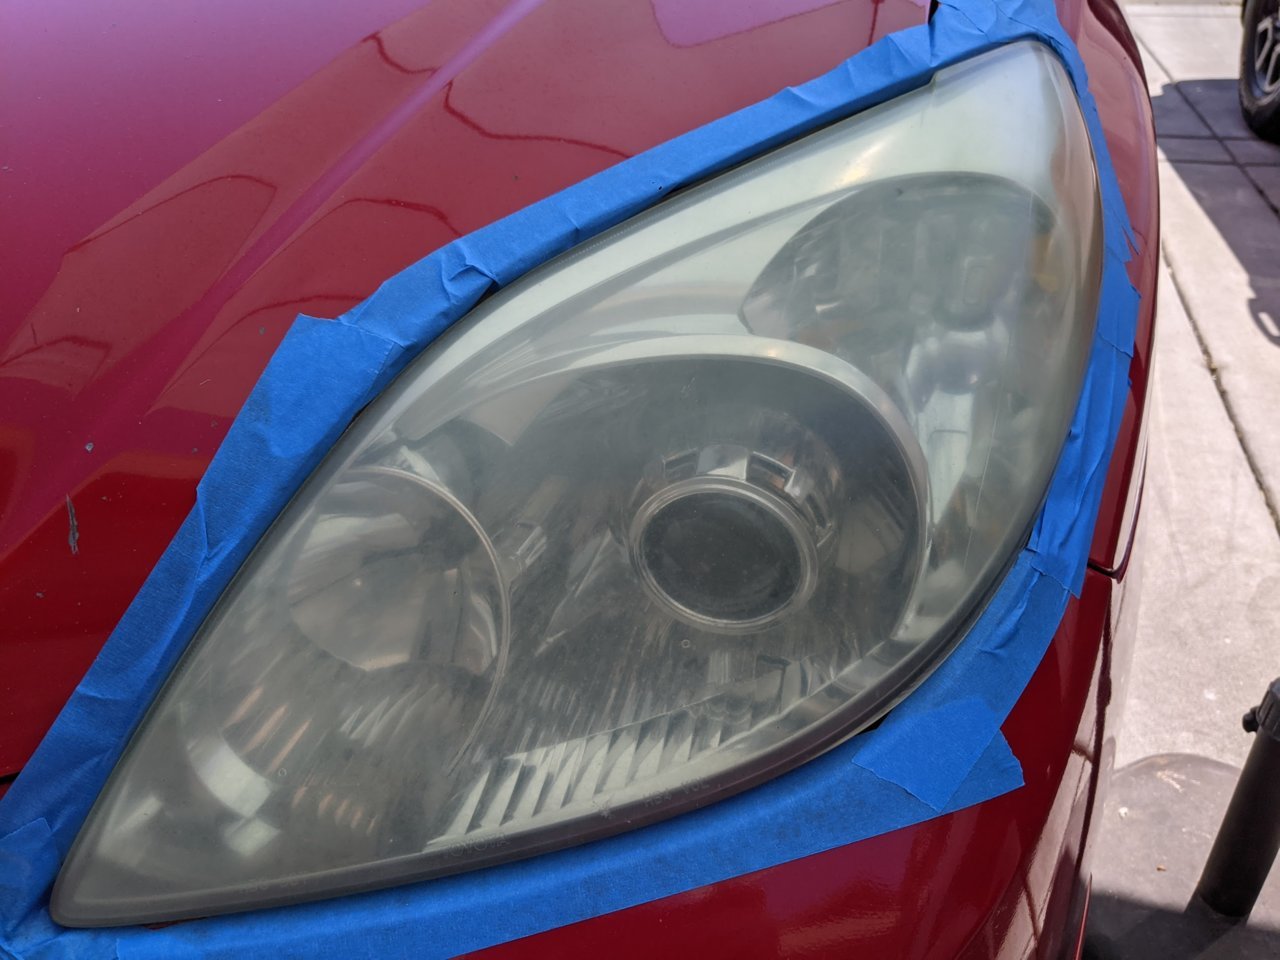 Chemical Guys UK - Are your headlights not looking as sharp as they once  used to? Restore them with Headlight Restorer!⁣ ⁣ Headlight Restorer is a  one step product that removes the